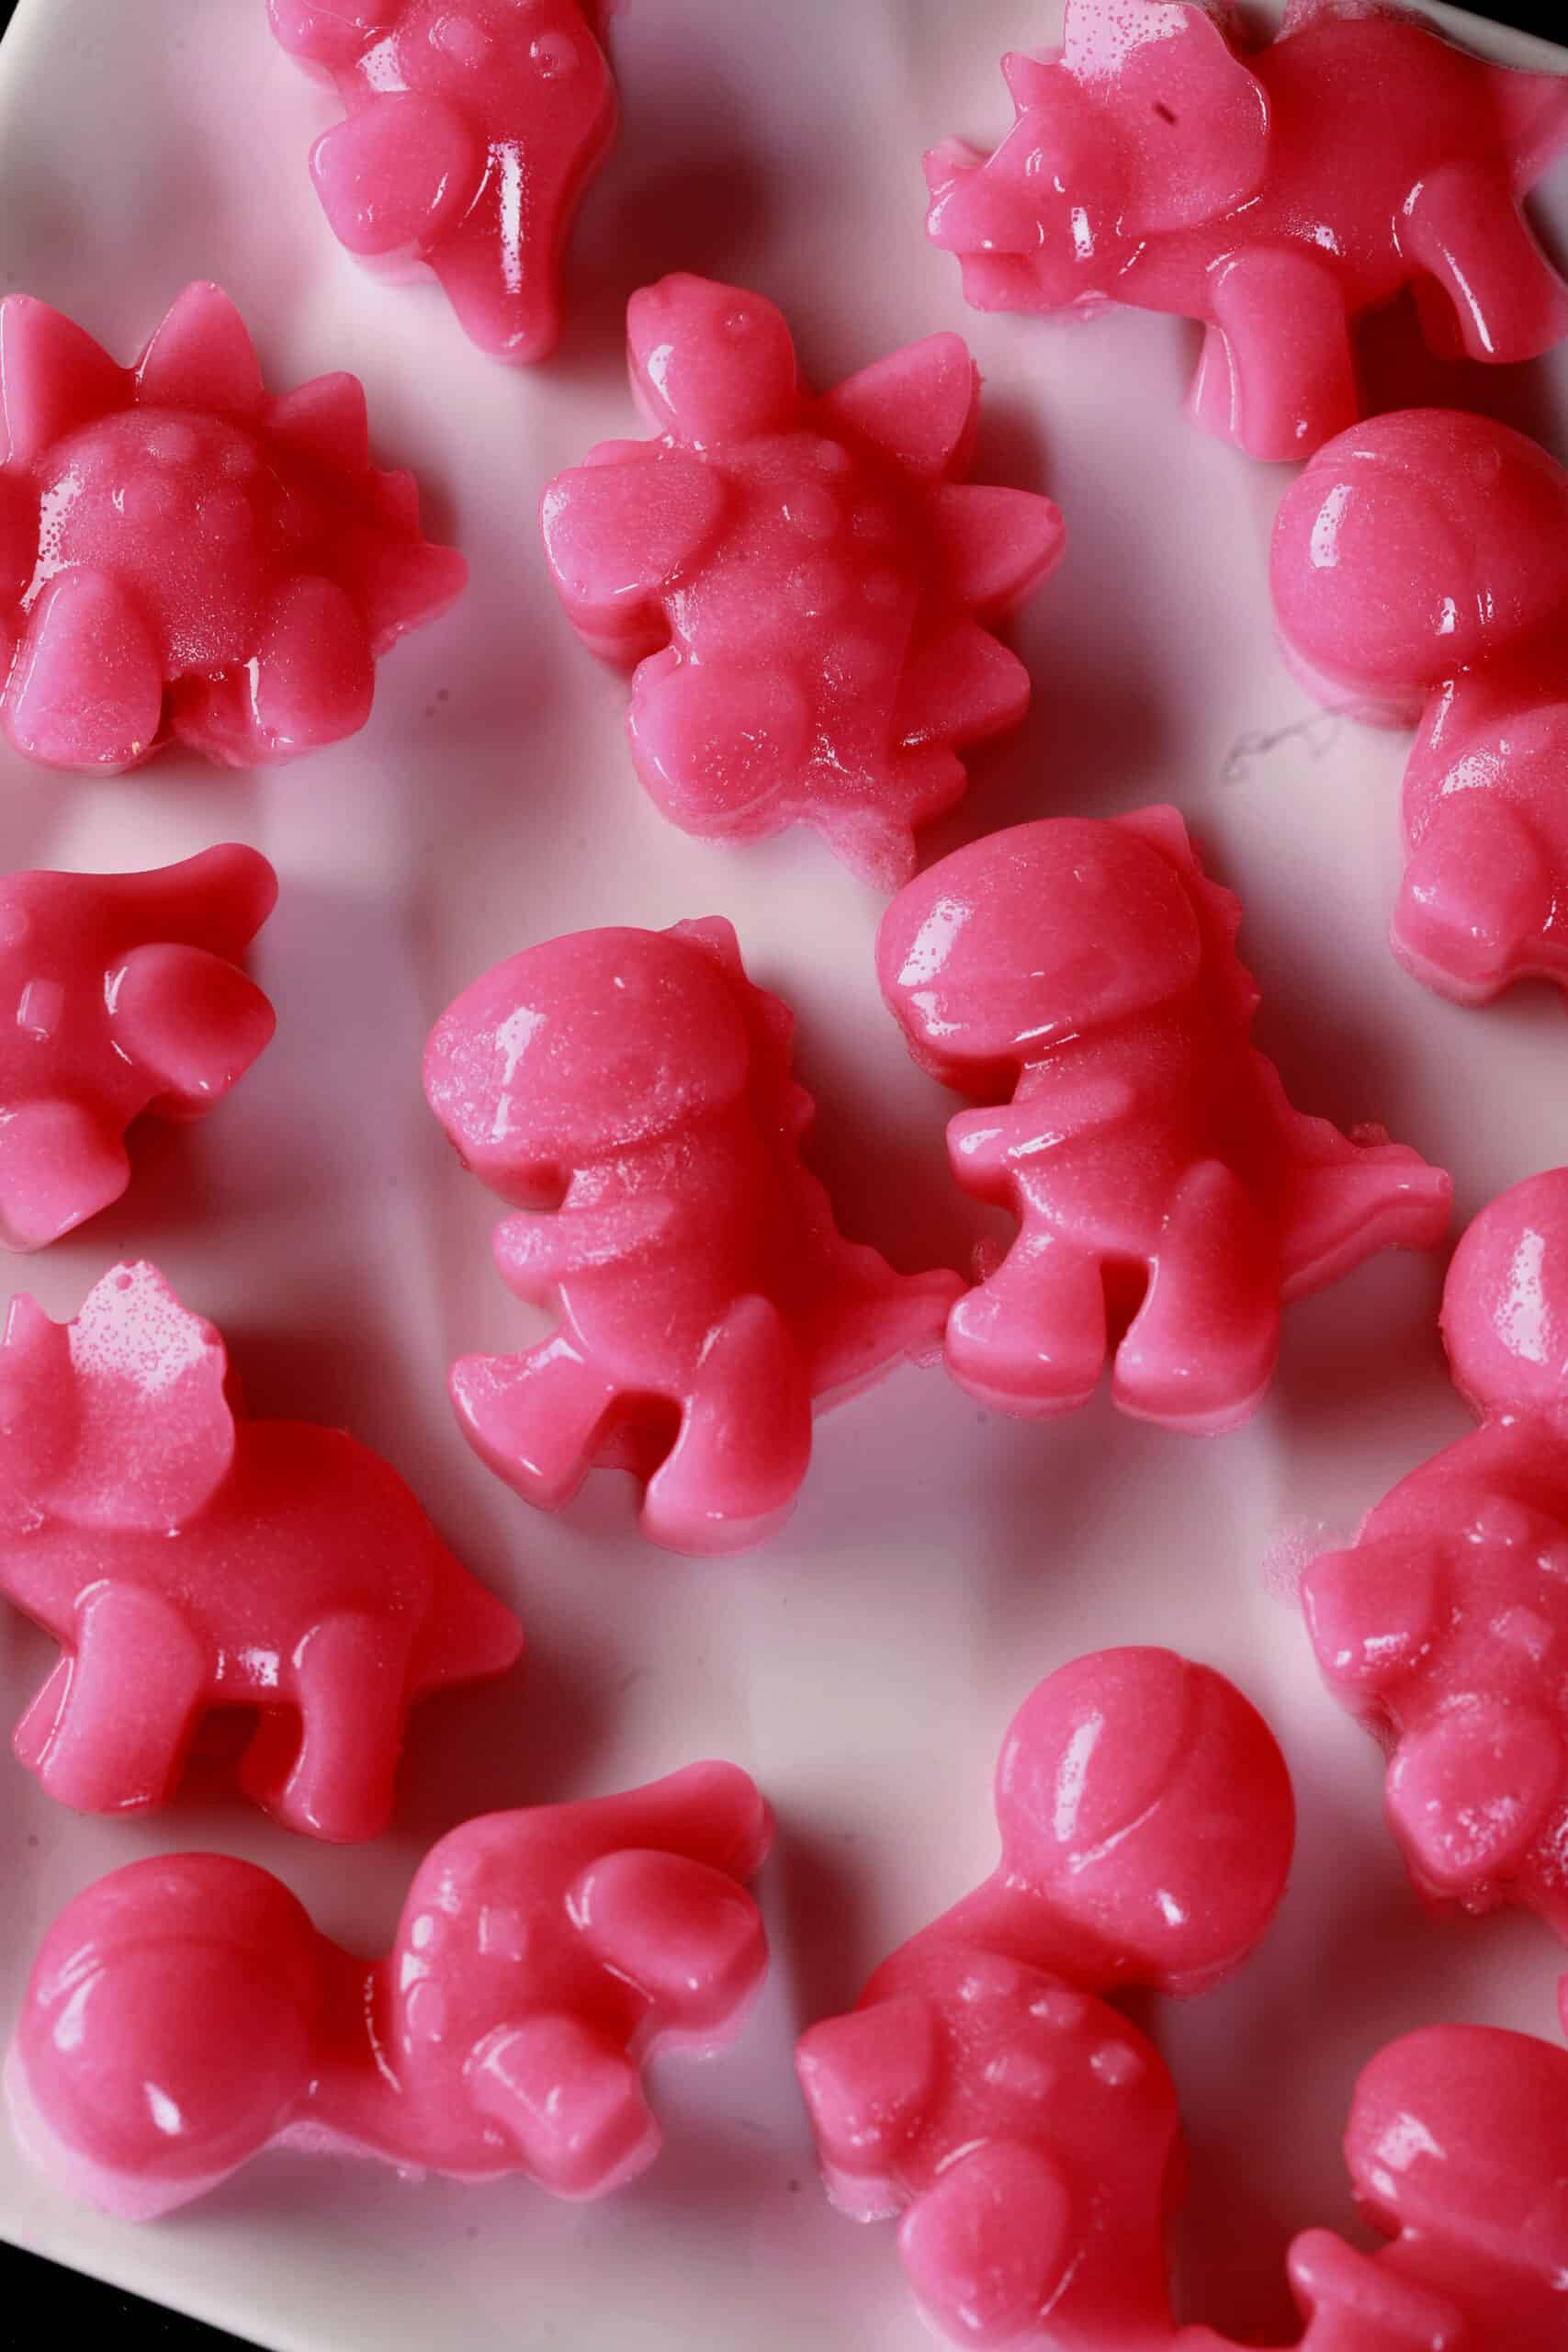 Pink dinosaur shaped homemade protein gummies on a plate.